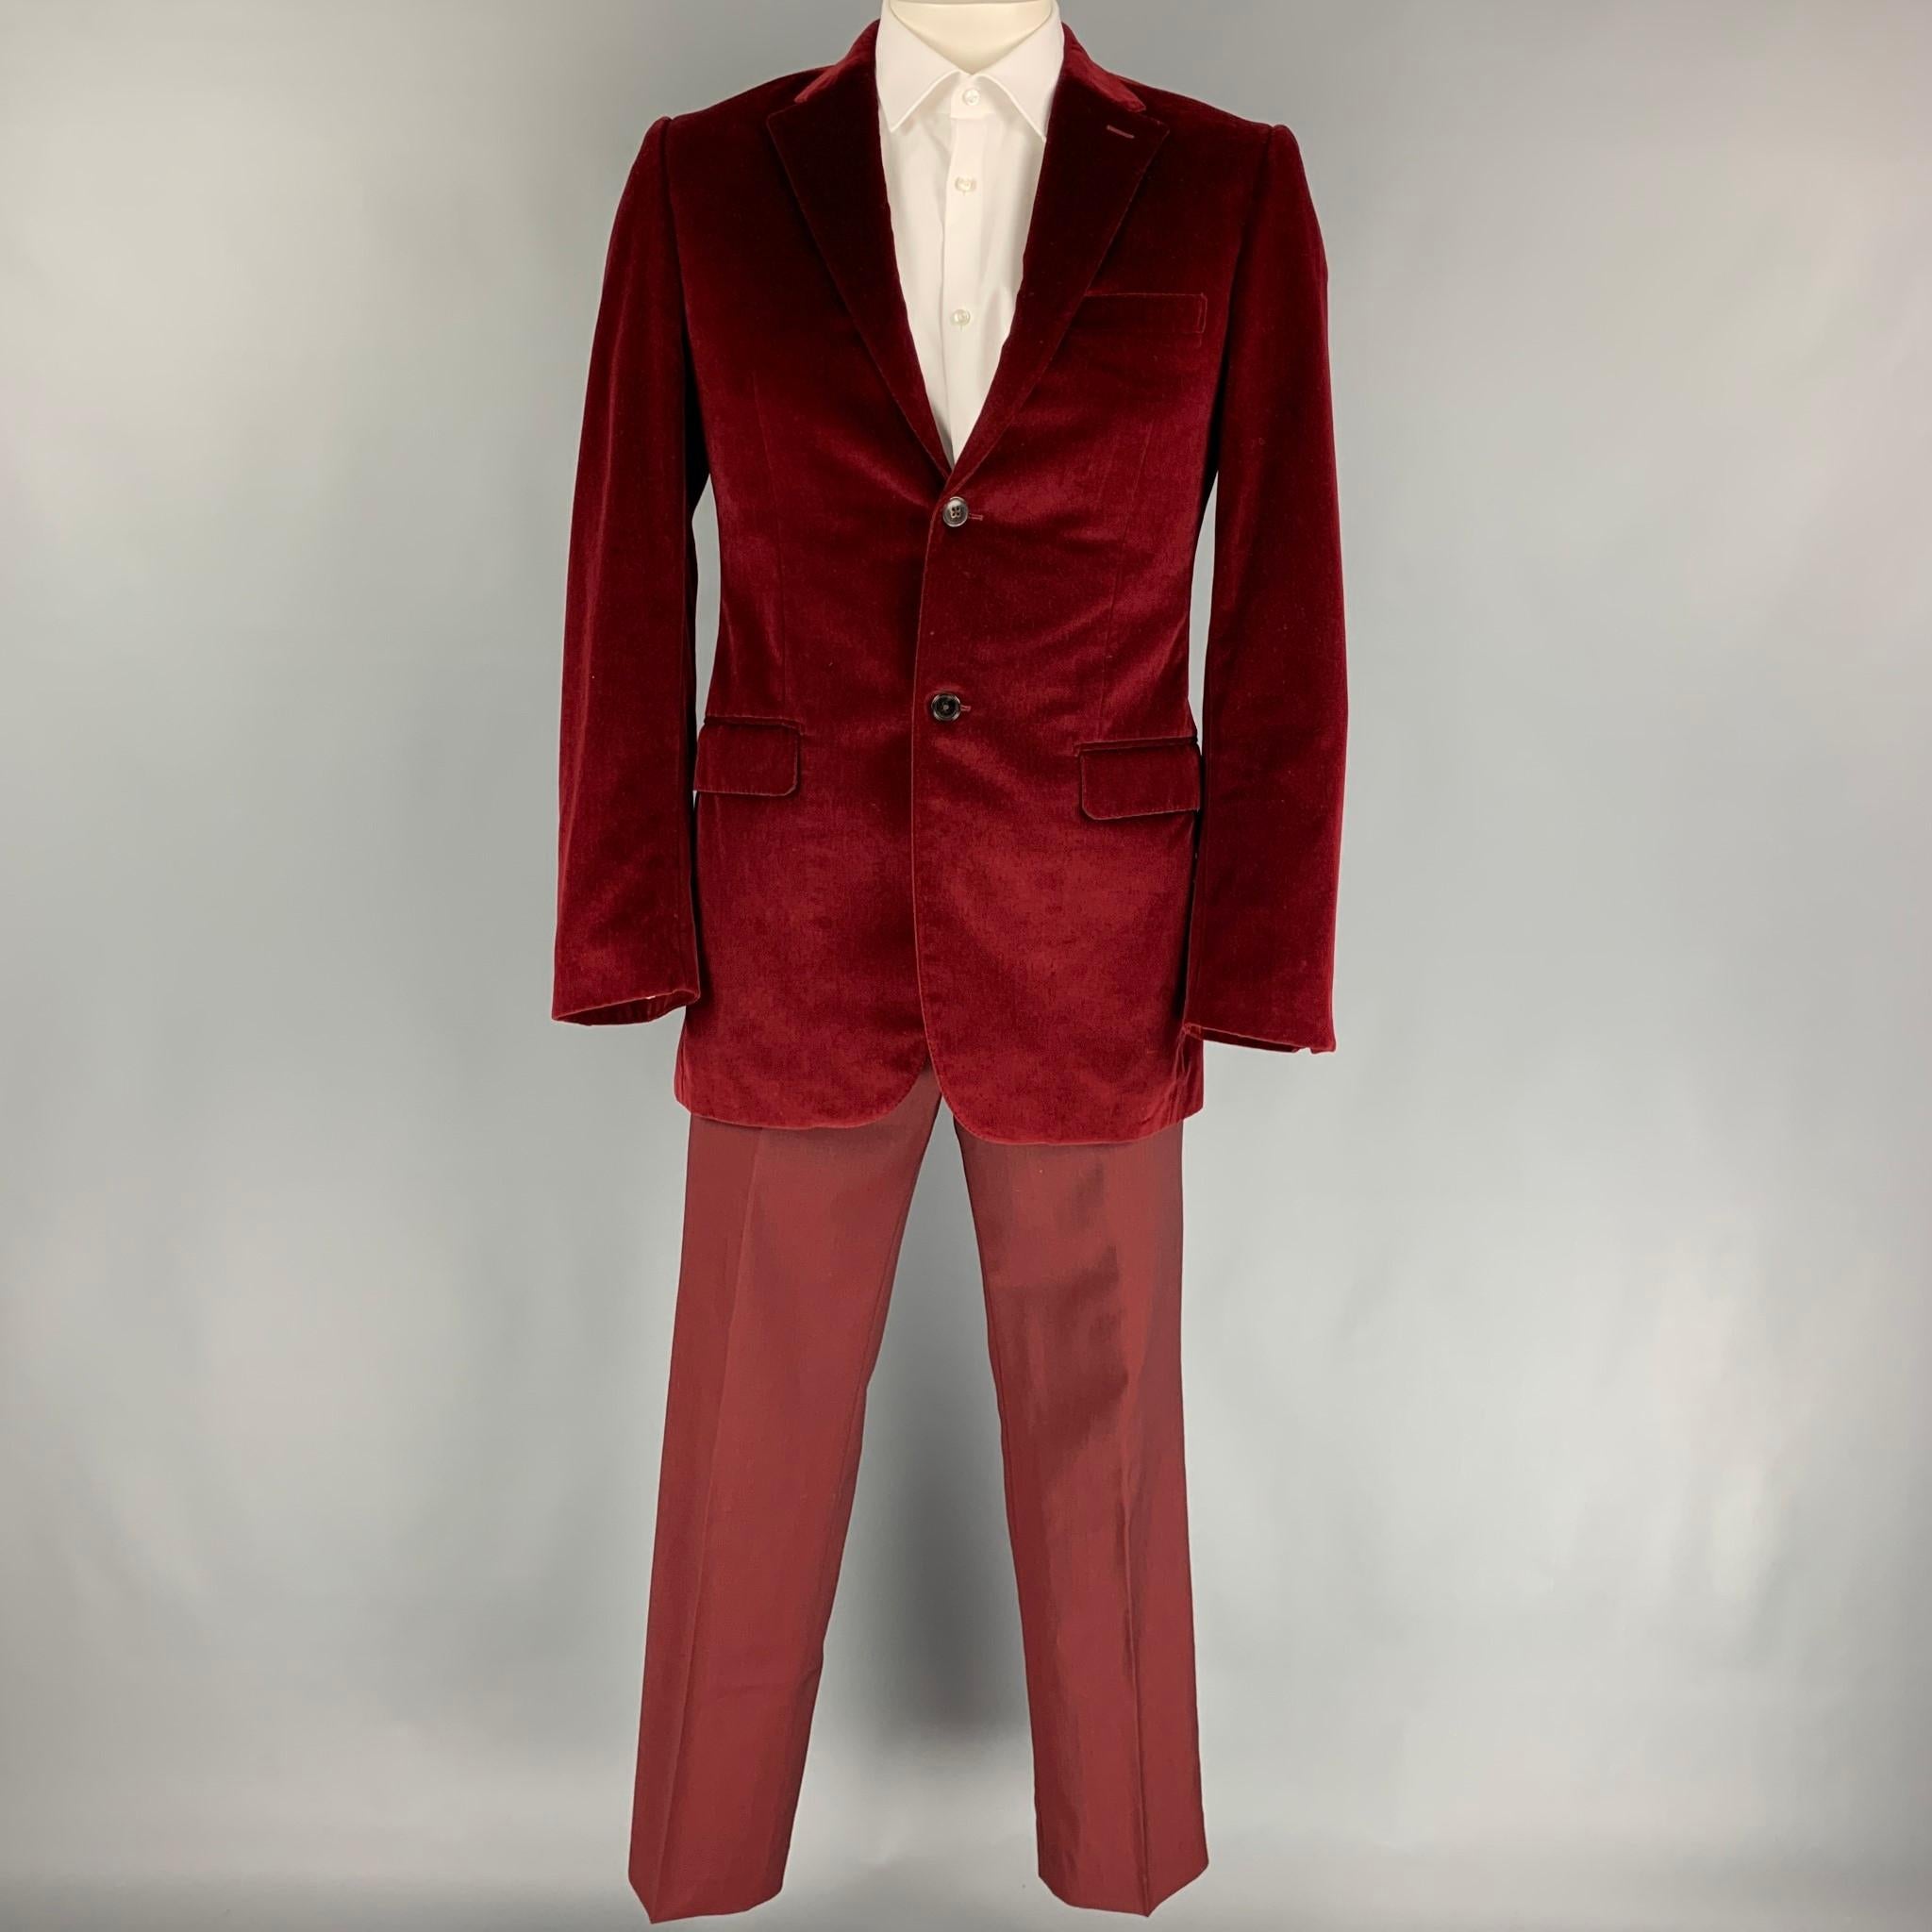 GIVENCHY suit comes in a burgundy velvet with a full liner and includes a single breasted, double button sport coat with a notch lapel and matching flat front trousers. Made in Italy.

Excellent Pre-Owned Condition.
Marked: 50